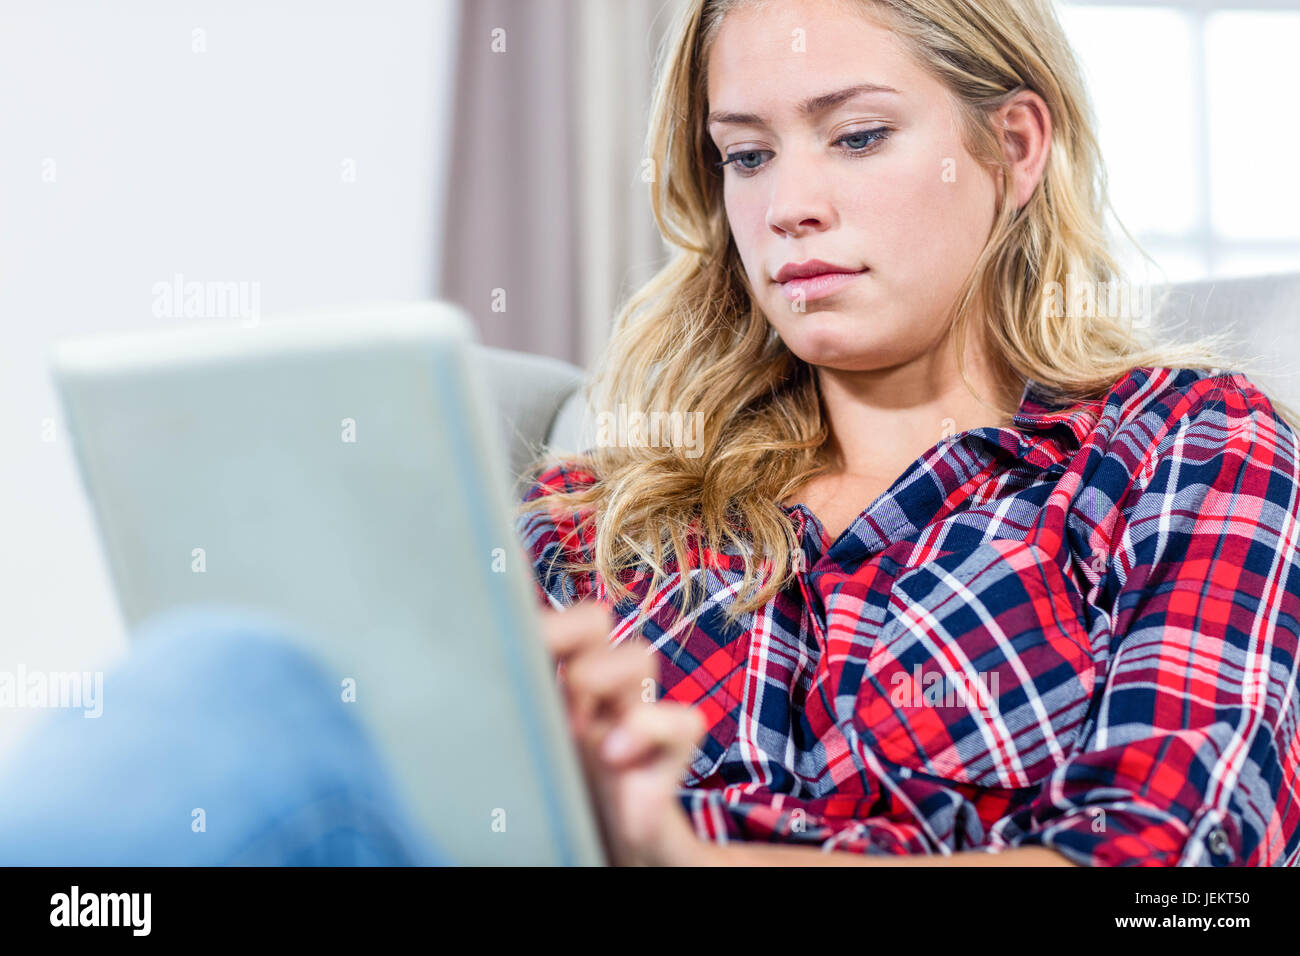 Woman using tablet computer Stock Photo